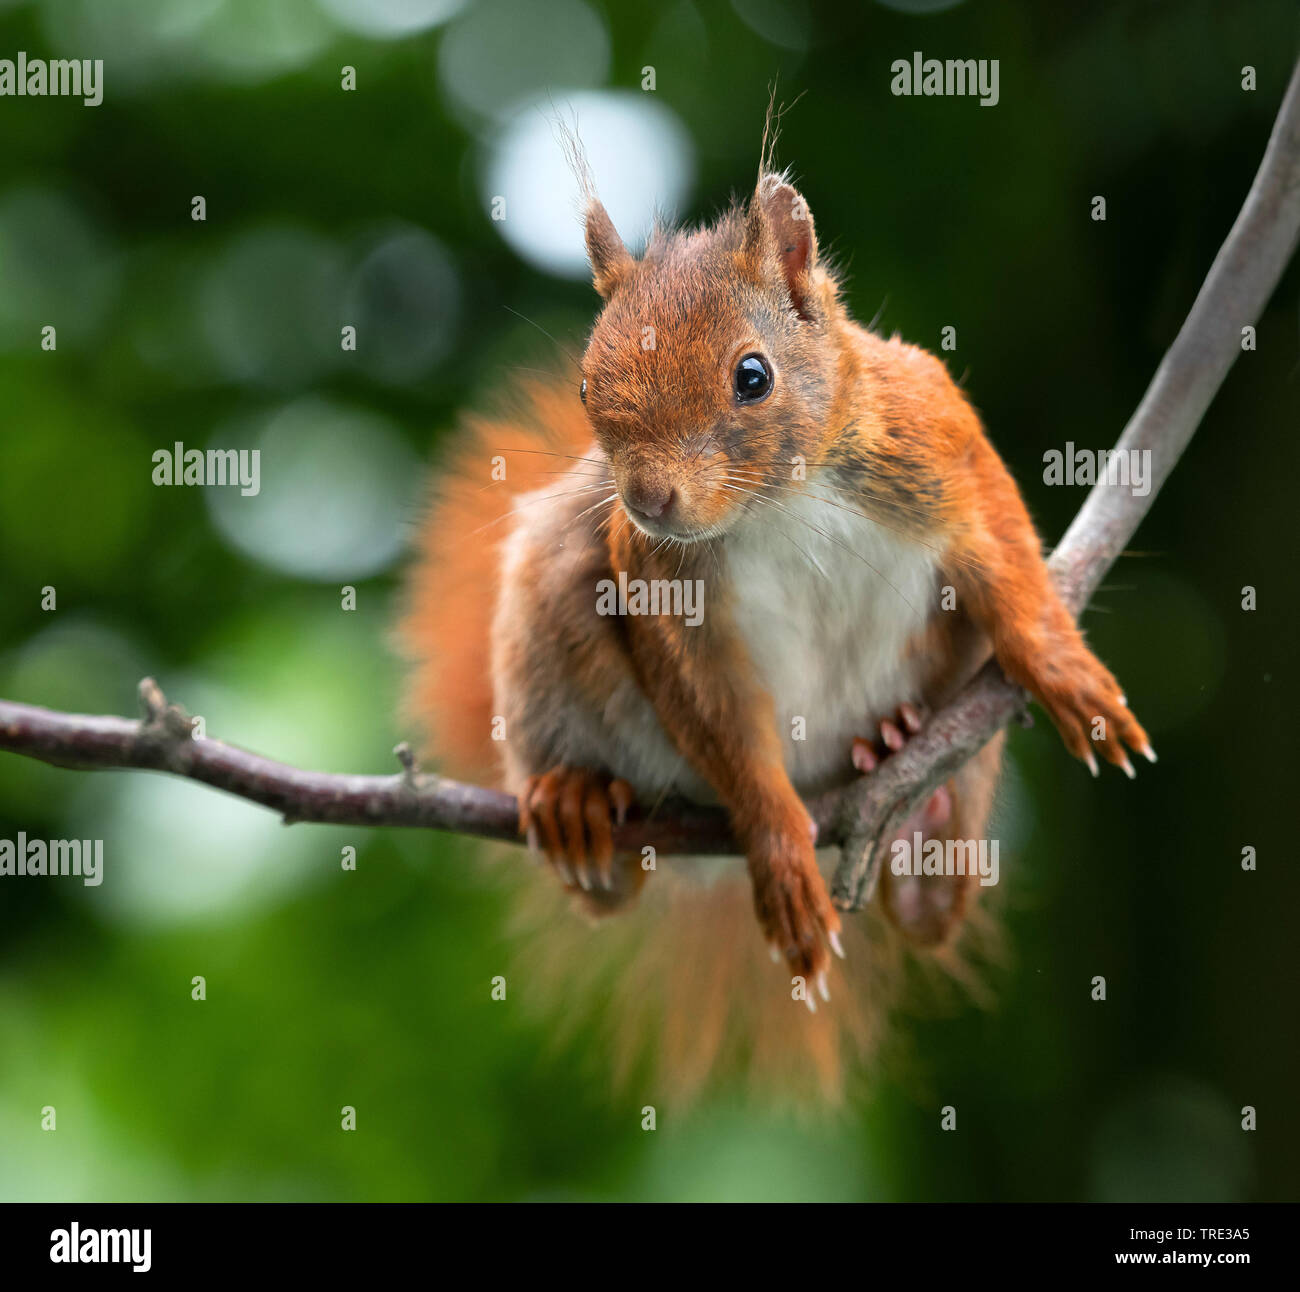 European red squirrel, Eurasian red squirrel (Sciurus vulgaris), sits on a twig and watching, front view, Germany, North Rhine-Westphalia Stock Photo